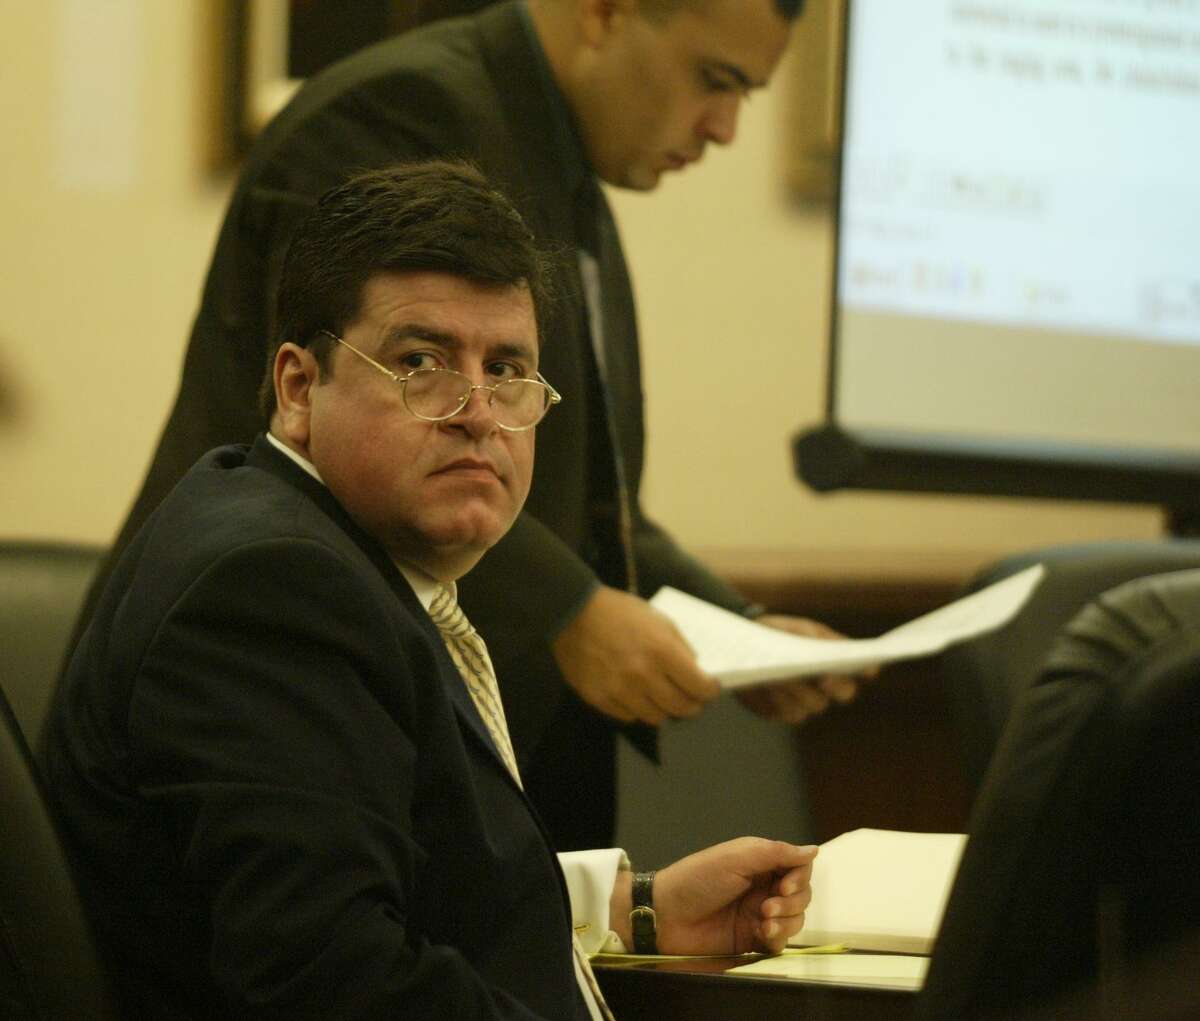 Former HPD Capt. Mark Aguirre, shown here in 2003, was arrested this week and charged with aggravated assault. Aguirre told investigators he was investigating an alleged ballot harvesting scheme in October when he forced an air conditioning repair man off the road and held him at gunpoint, according to the Harris County District Attorney’s office. (Buster Dean / Chronicle)